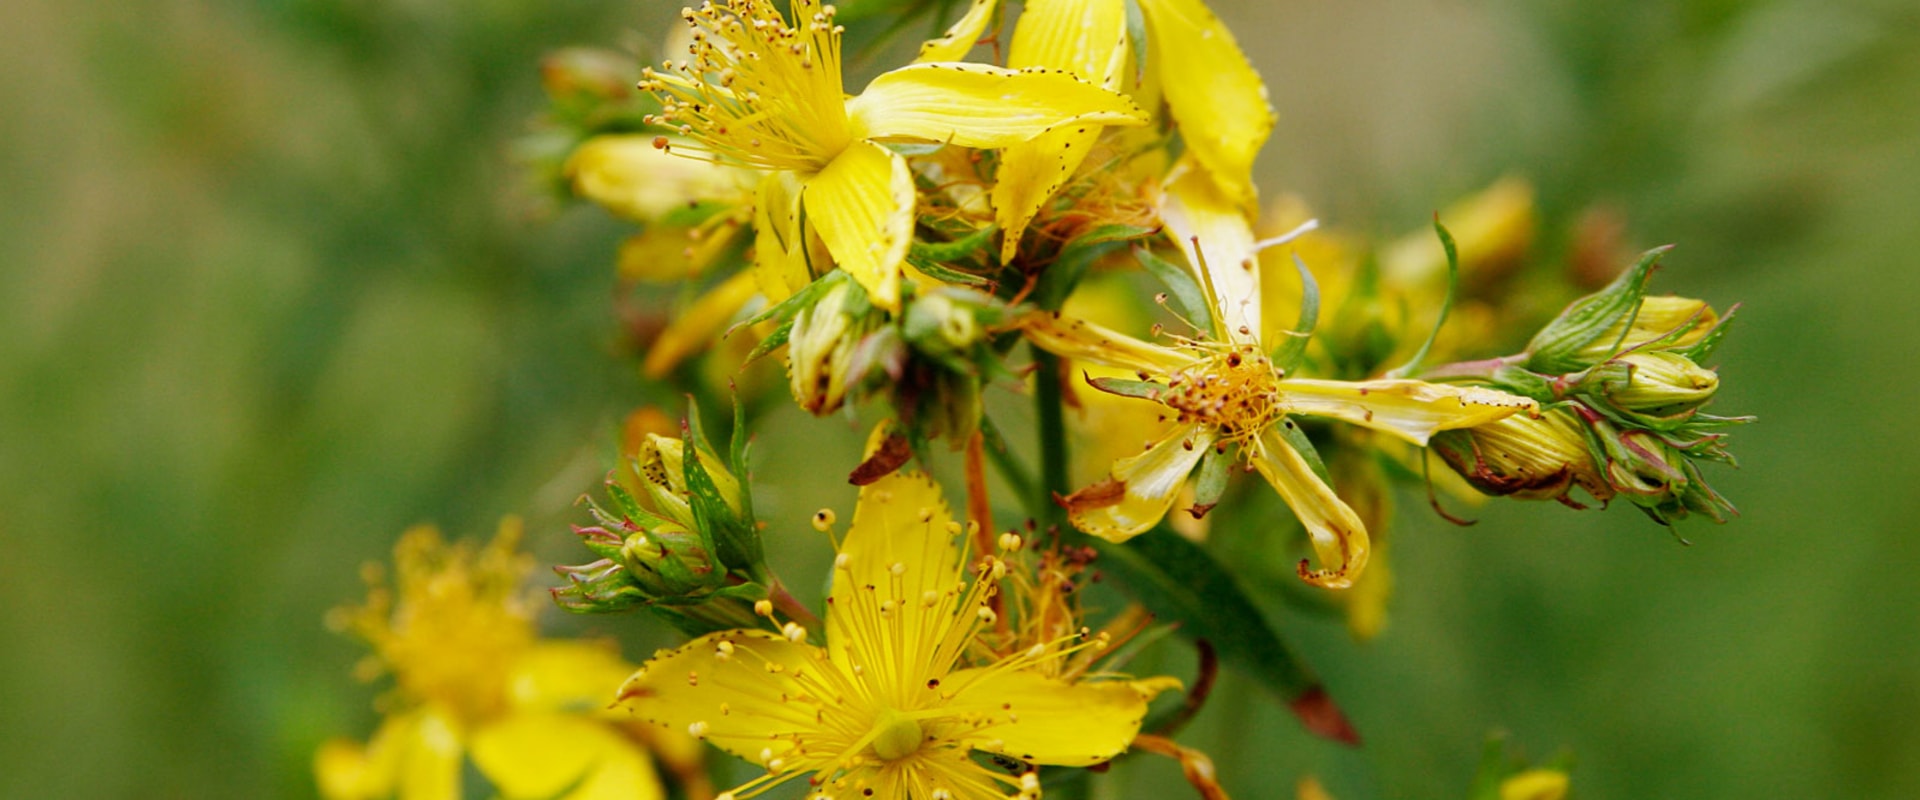 The Truth About St. John's Wort: A Stimulating Supplement or a Dangerous Drug?